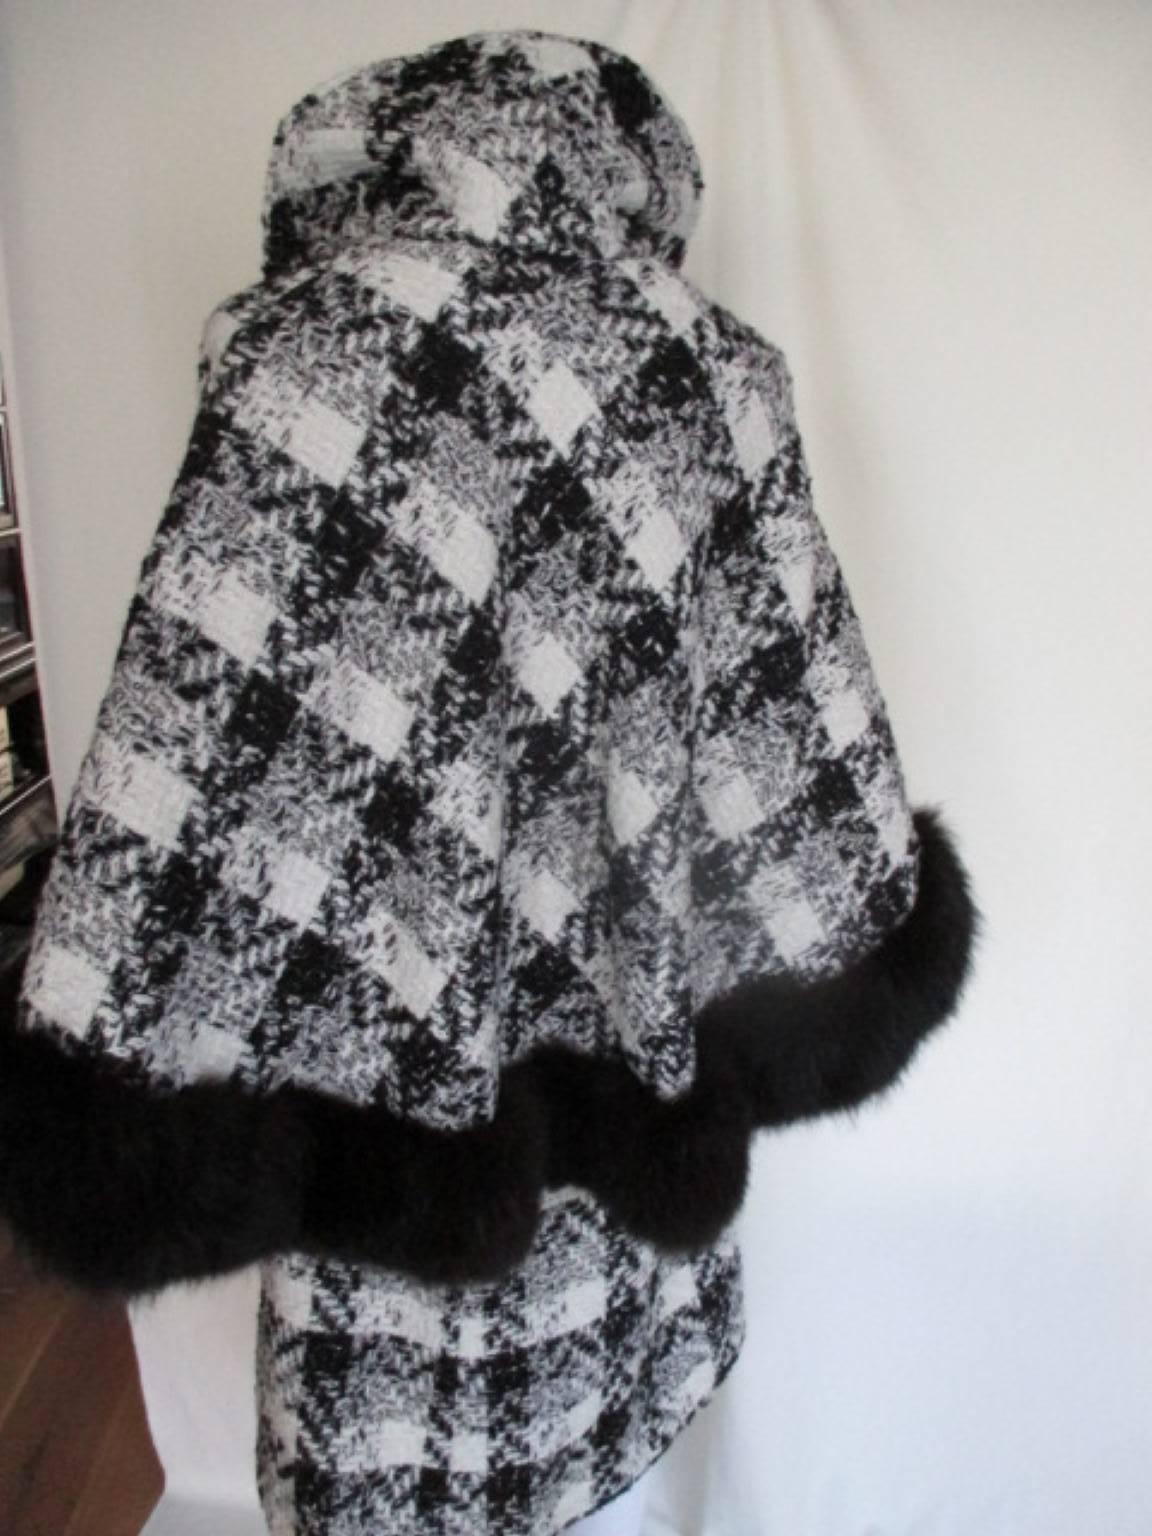 Stylish Check Wool Cape Coat with Black Fox Fur In Good Condition For Sale In Amsterdam, NL